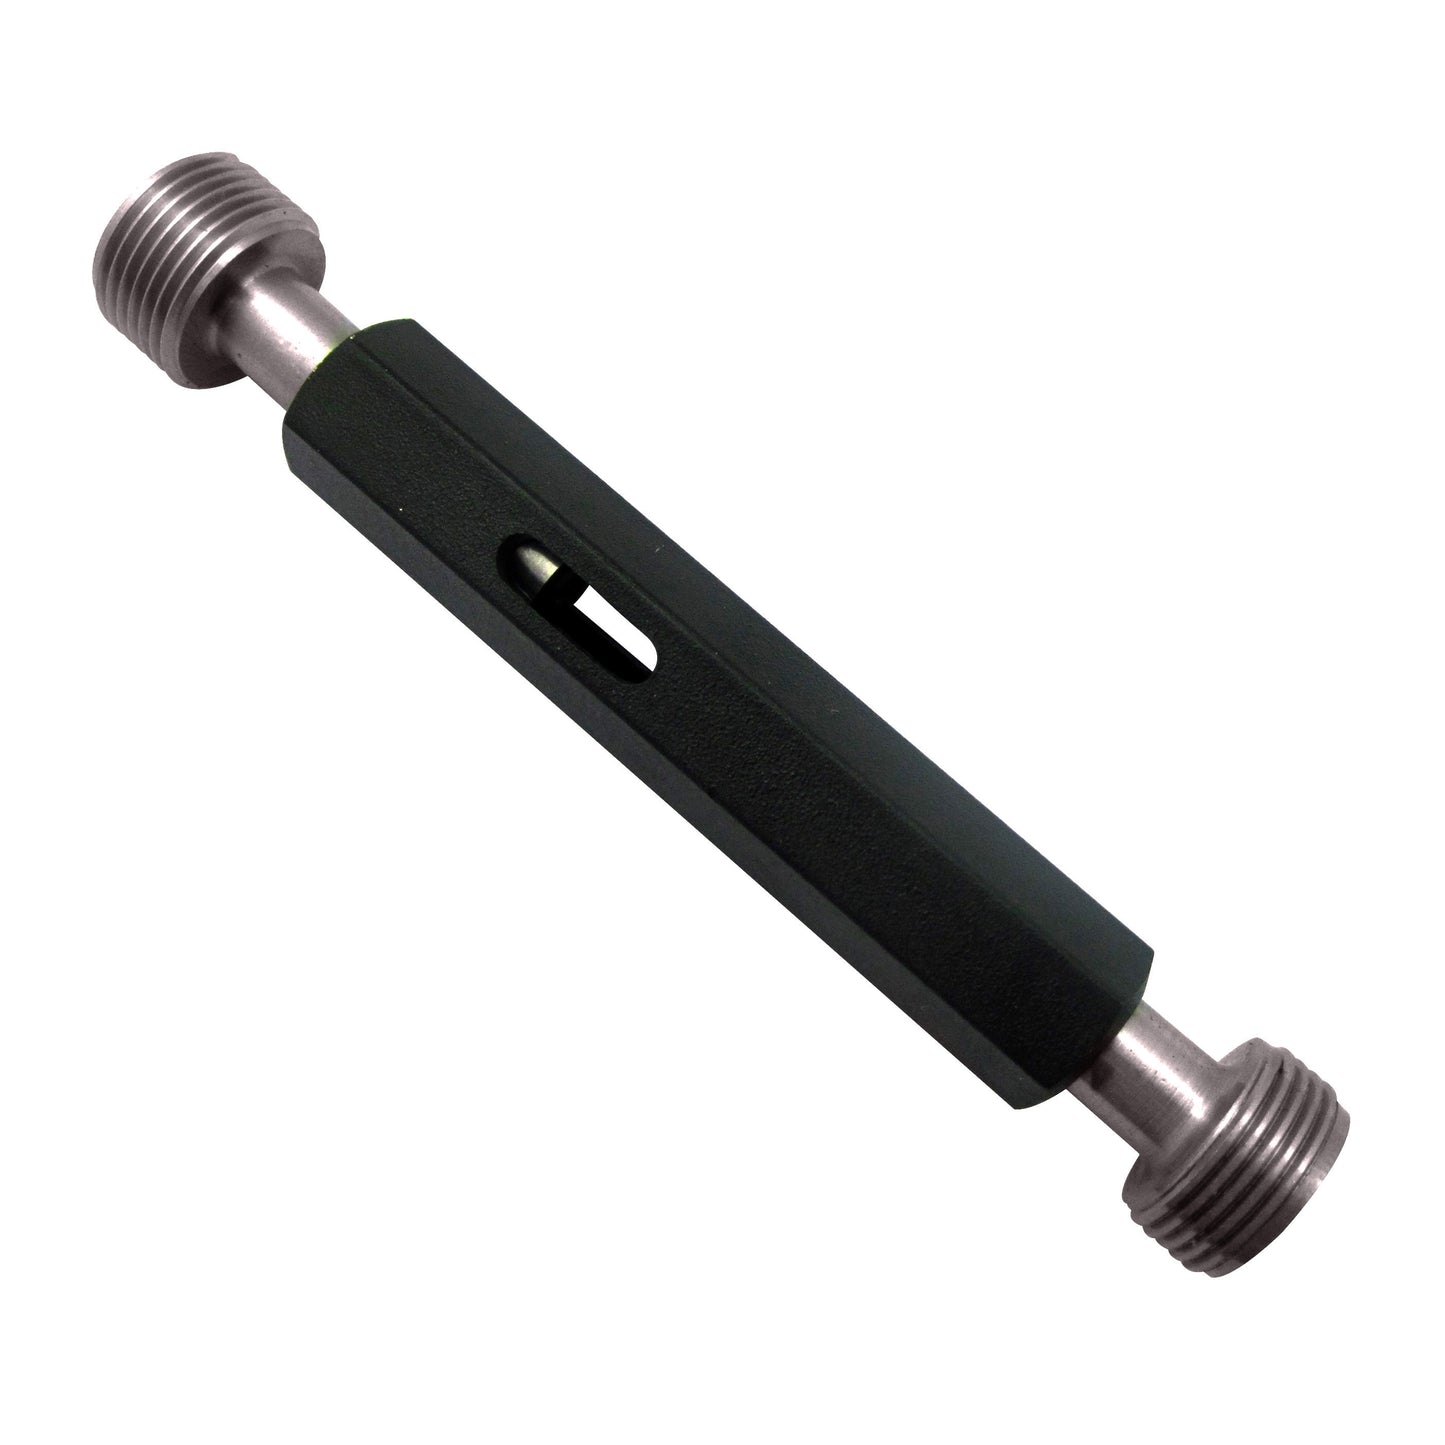 9/16" - 16 Unified Right Hand Thread Plug Gauge